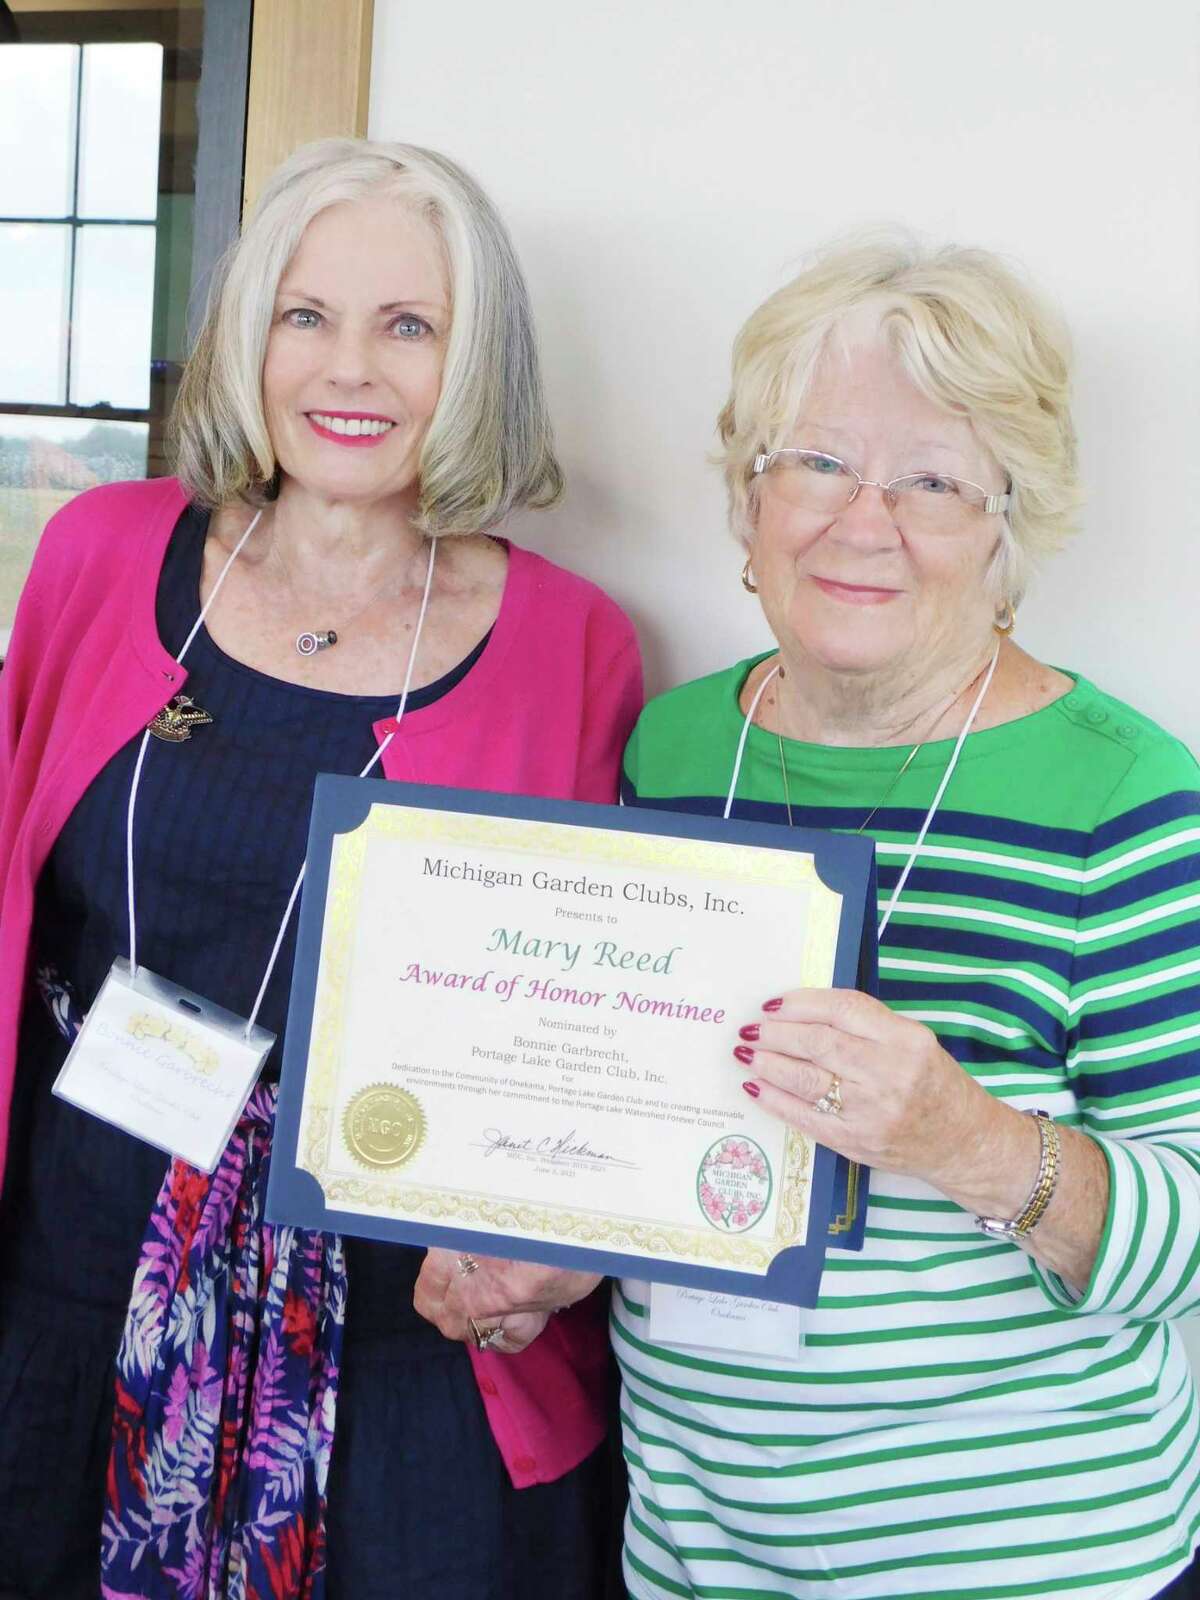 Mary Reed, of Onekama, has been nominated for the Michigan Garden Club Award of Honor. She is pictured with Portage Lake Garden Club President Bonnie Garbrecht. (Courtesy photo/Chris Gravlin)